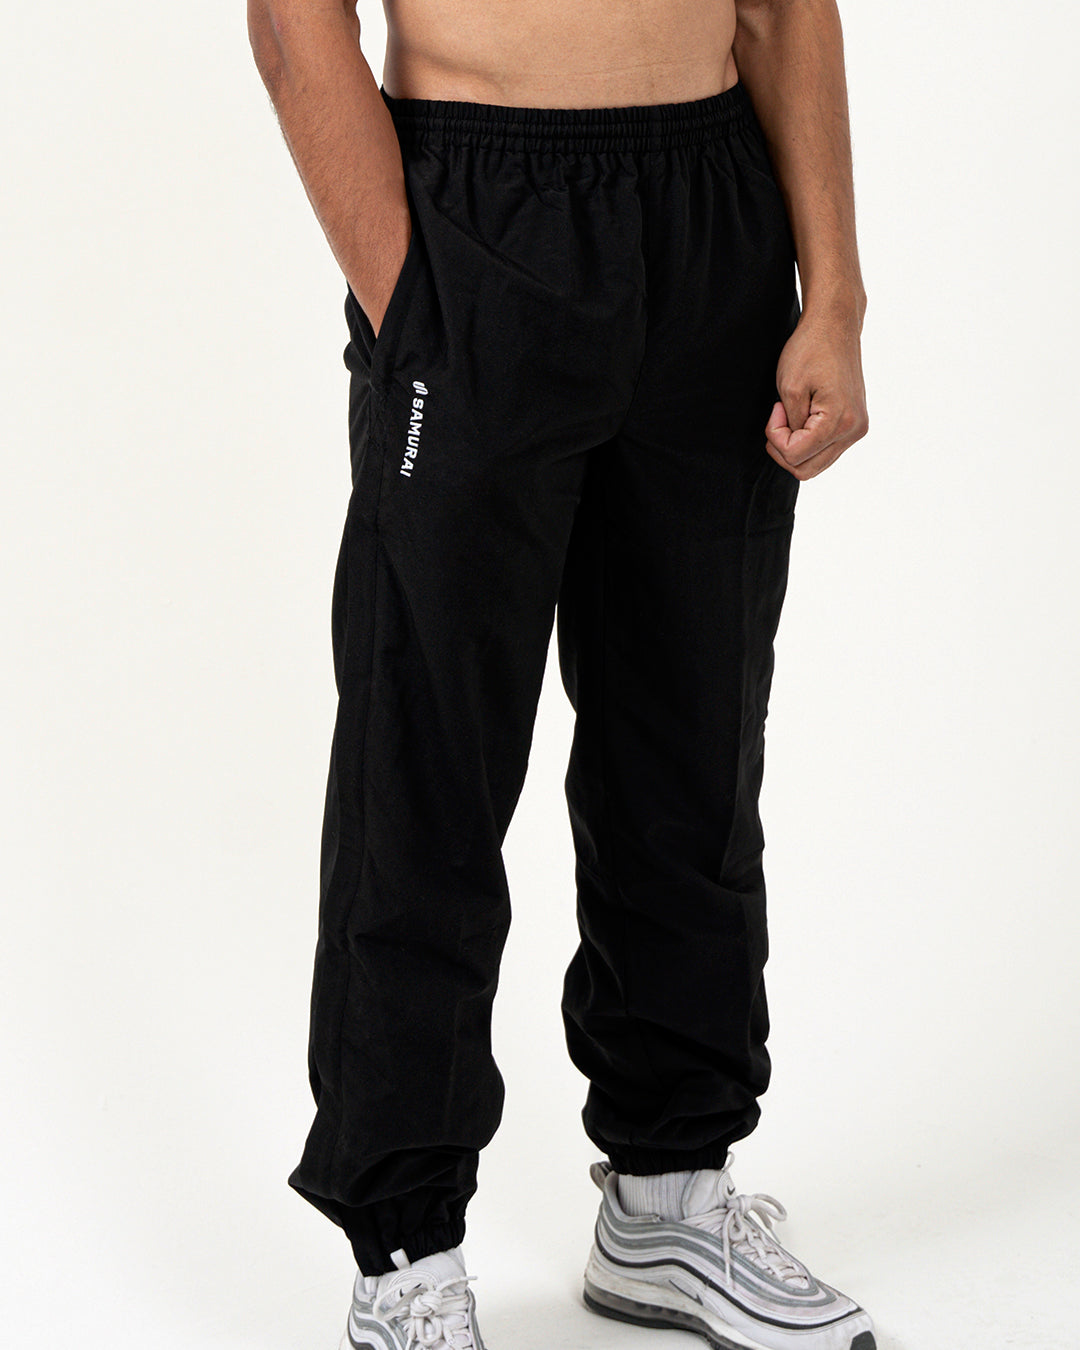 EP:0104 - Southland Track Pant 2.0 - Black